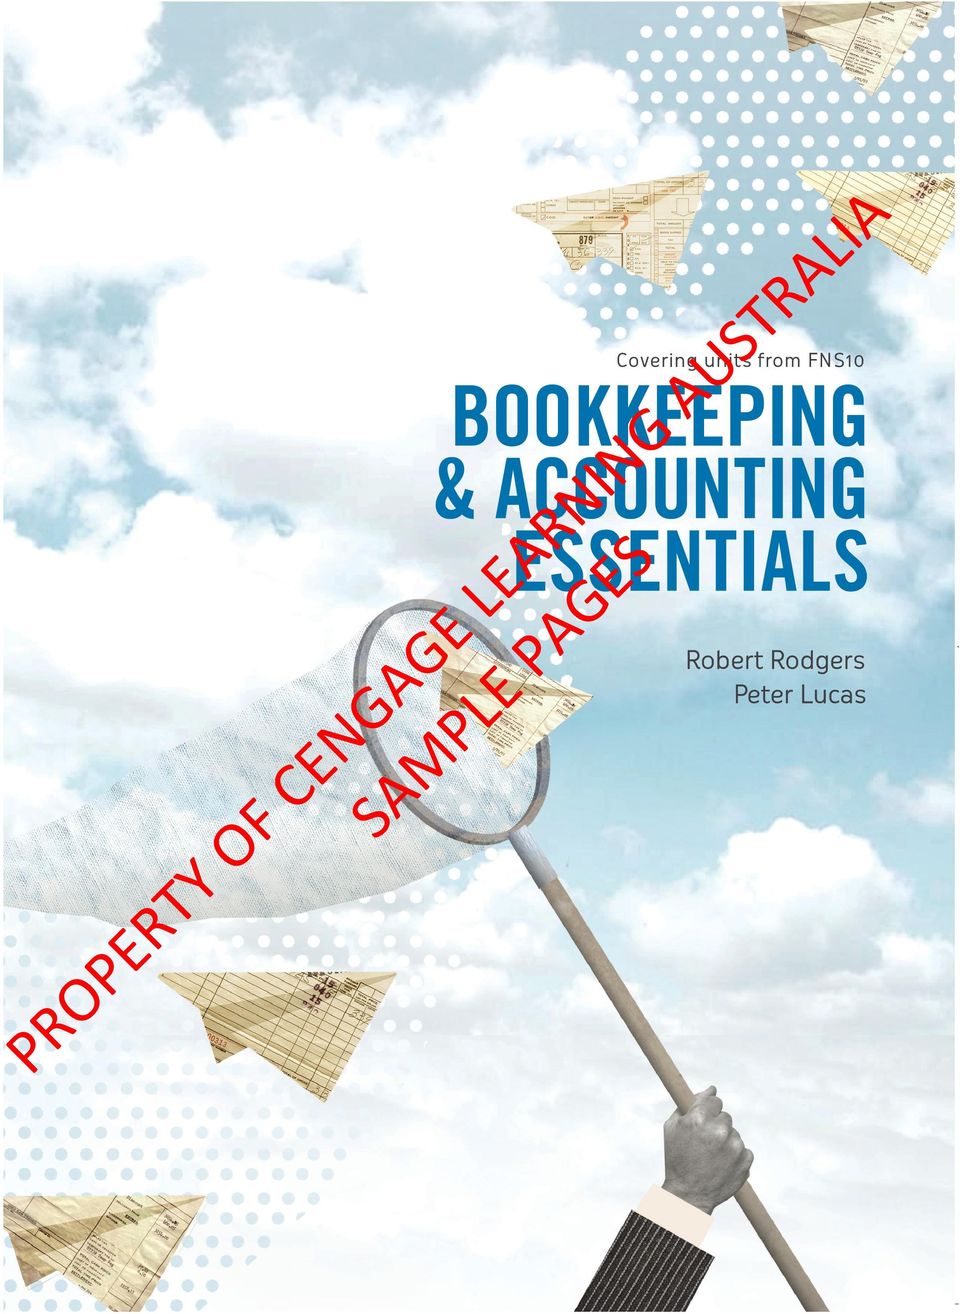 Free bookkeeping courses